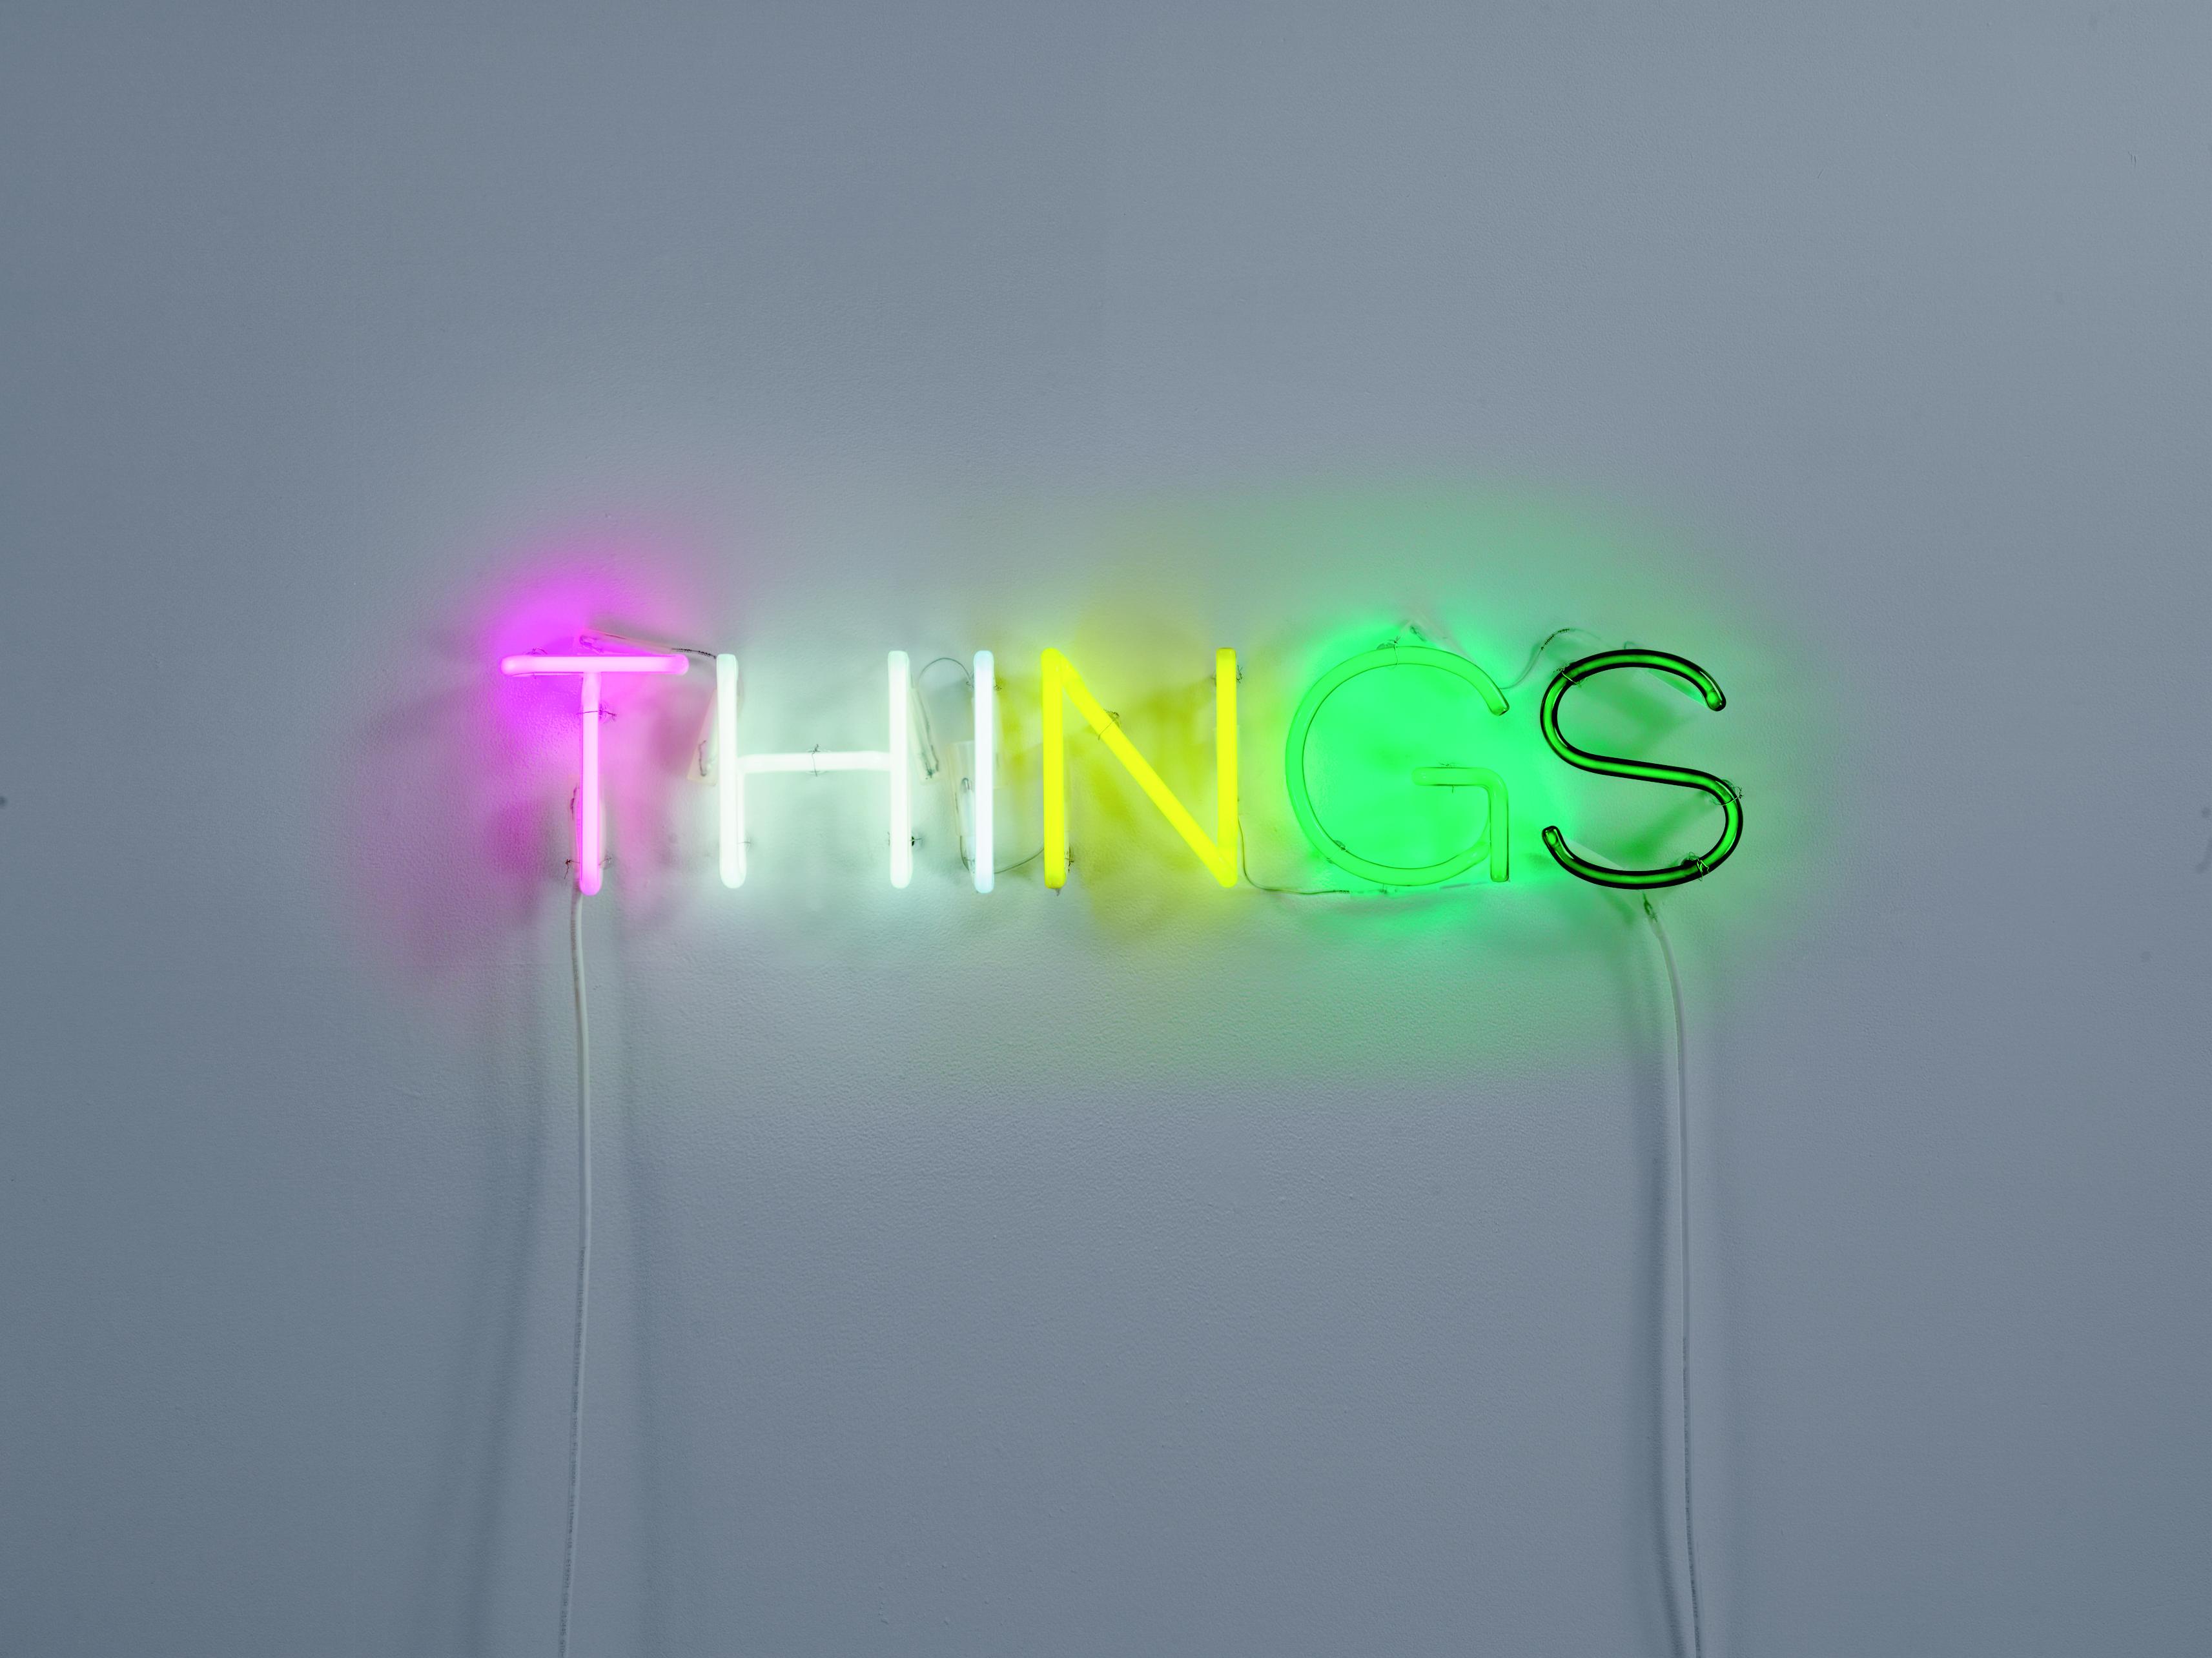 A glowing neon-light sculpture spells out the word "THINGS."